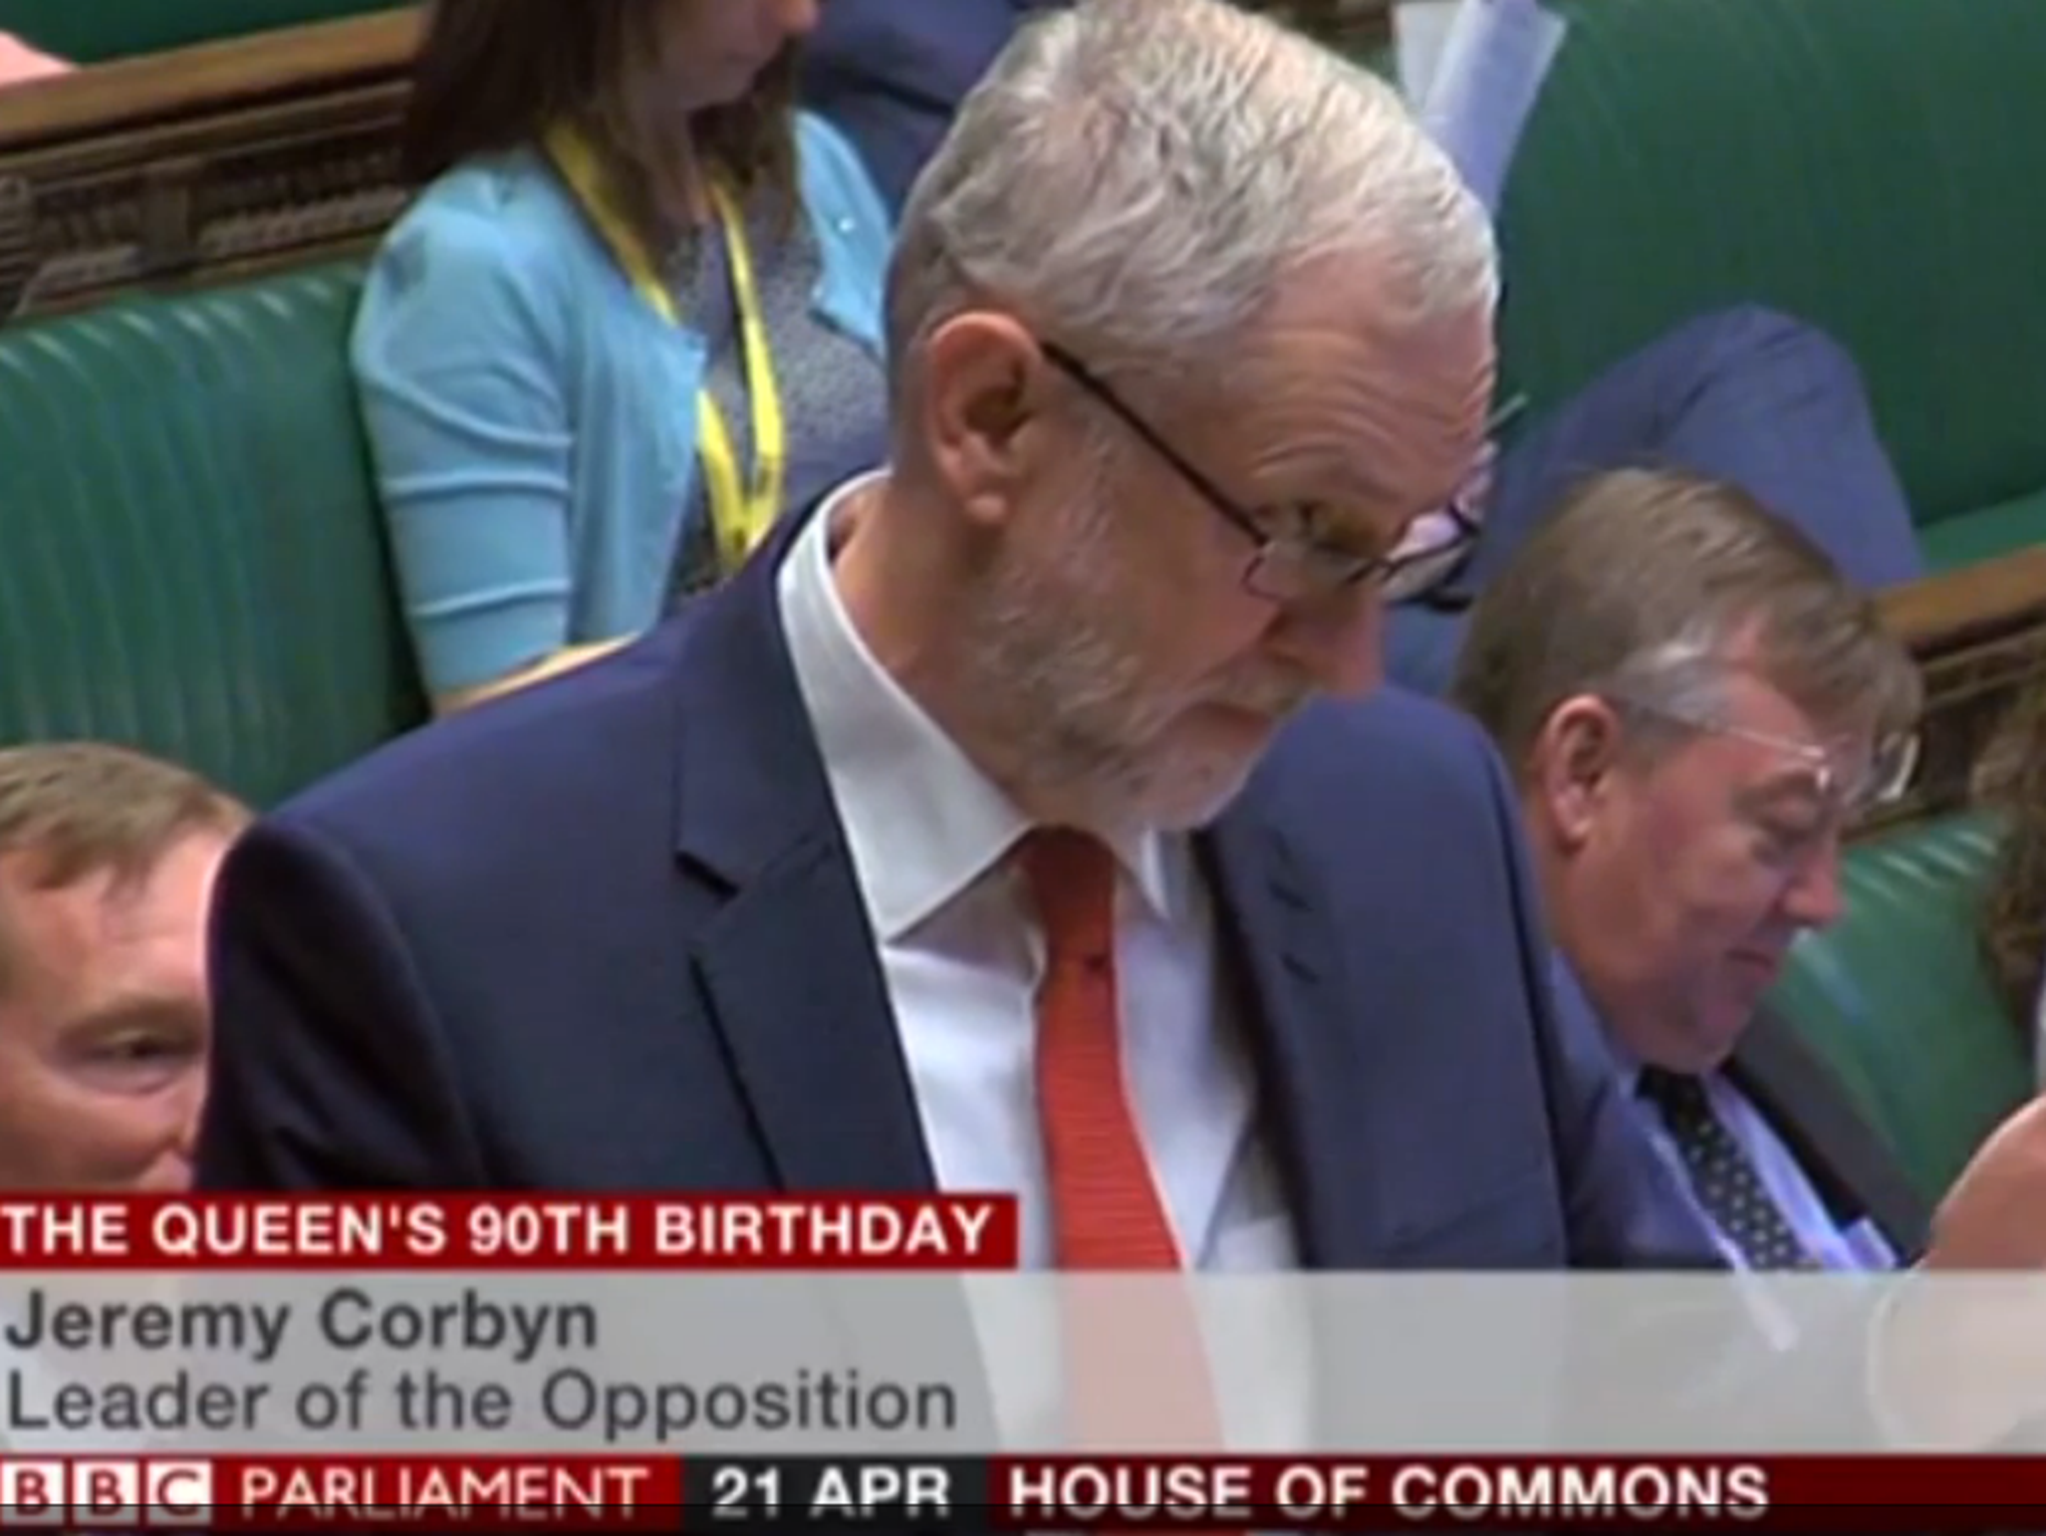 The Labour leader Jeremy Corbyn joked the Queen was an avid Arsenal supporter